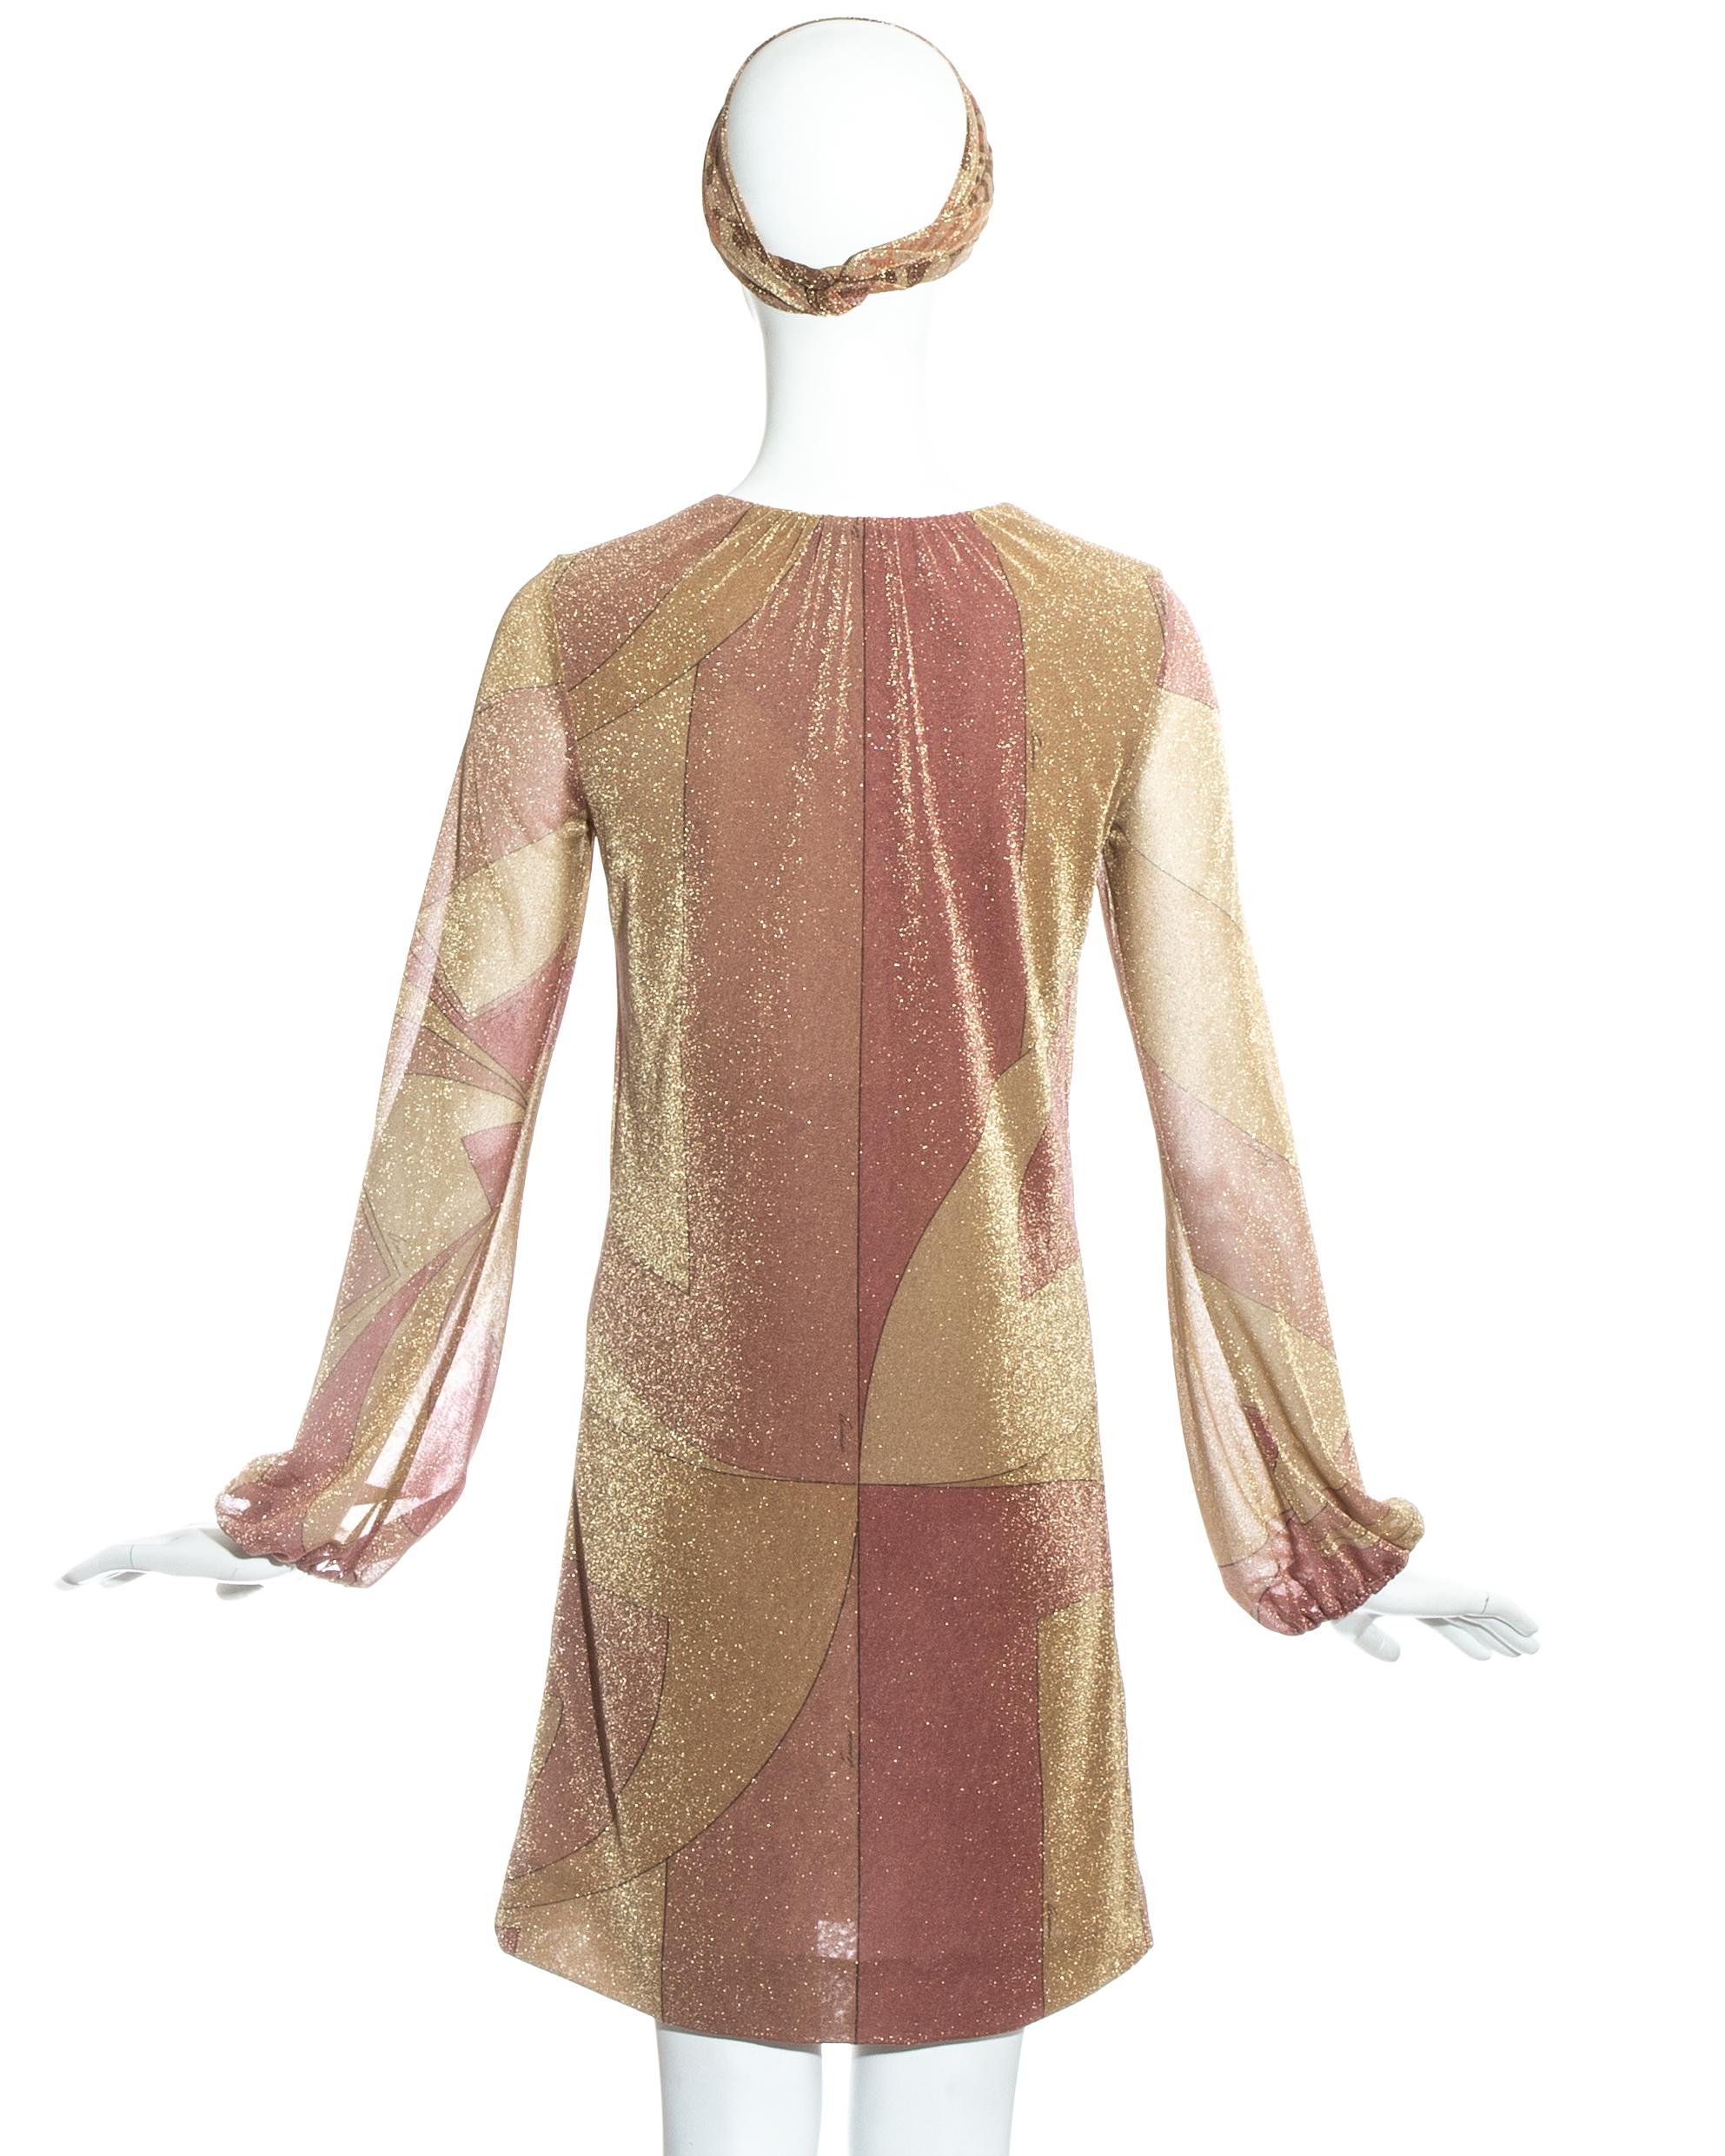 Gucci by Tom Ford pink and gold printed lurex dress with head scarf, fw 2000 In Excellent Condition For Sale In London, GB